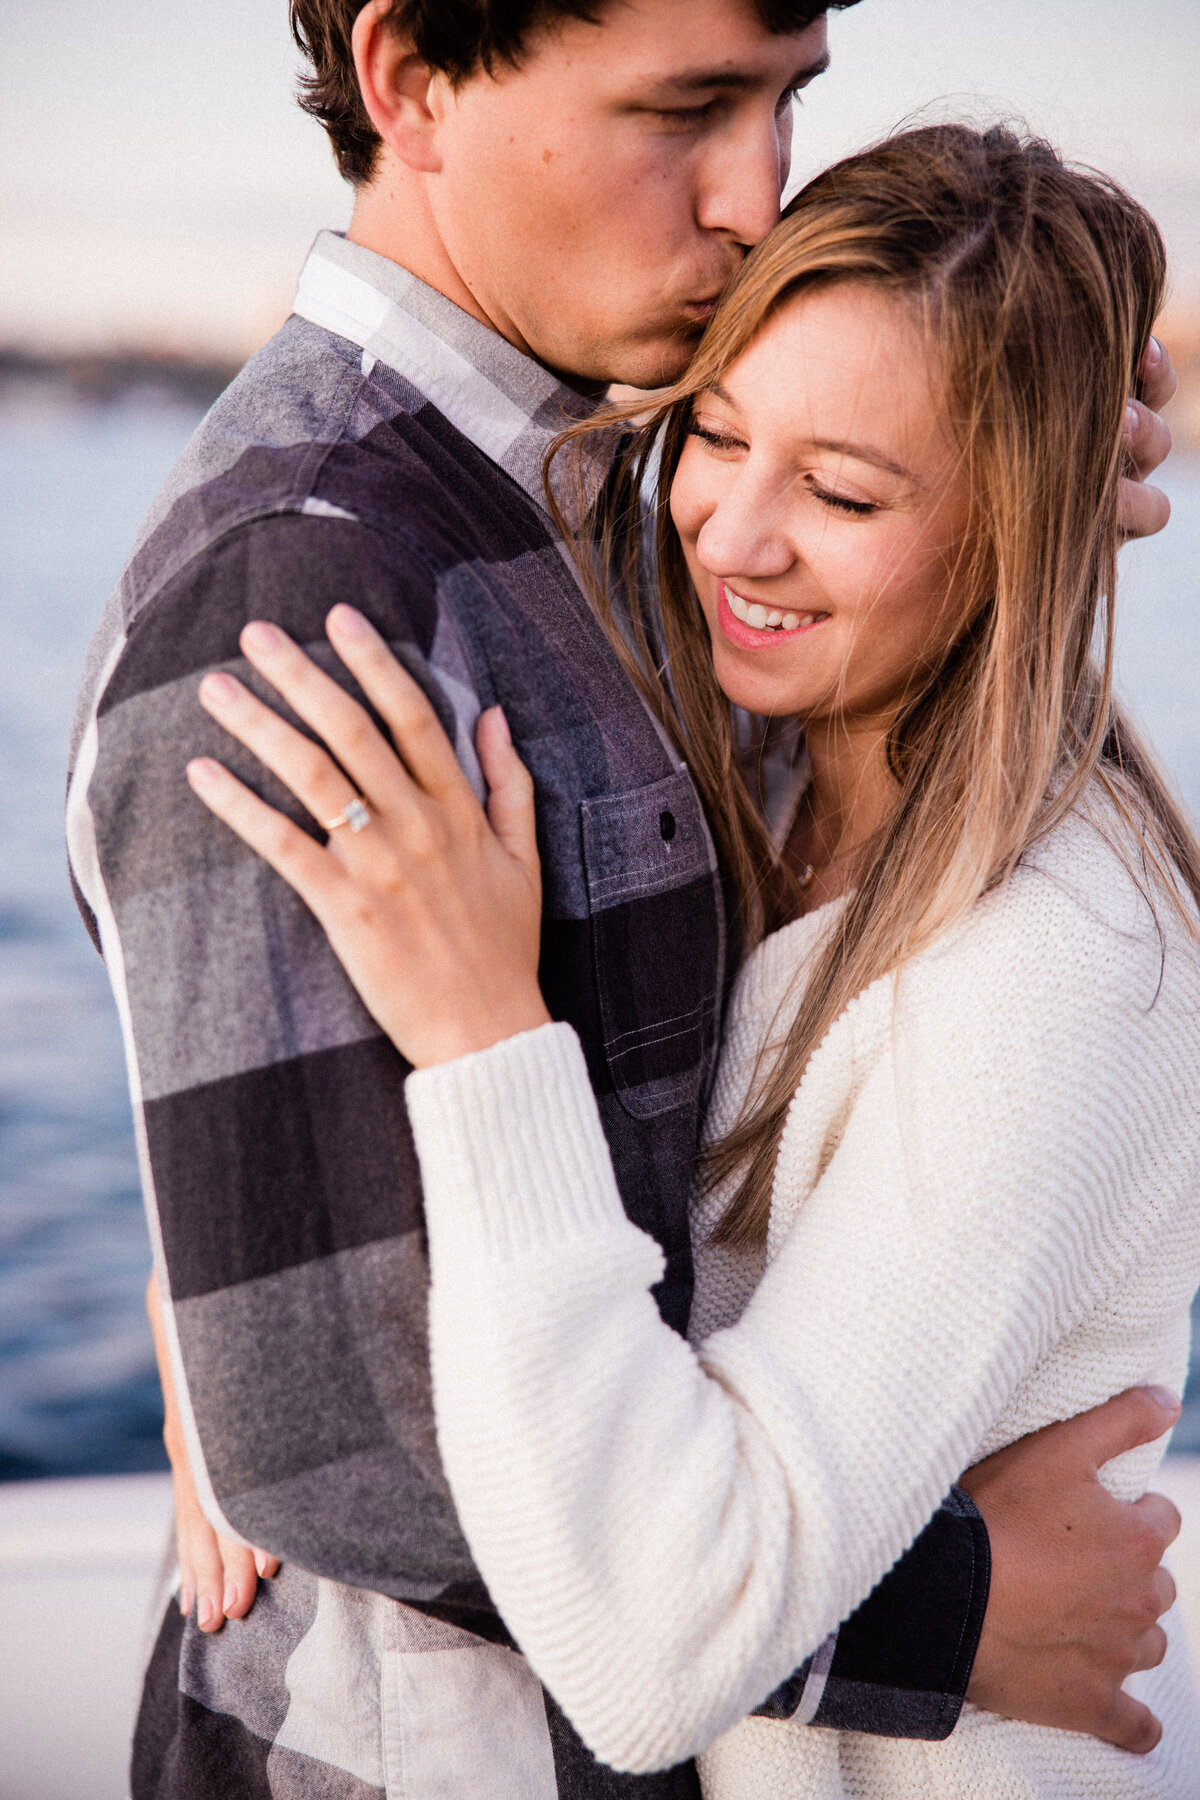 south-lake-union-engagement-photography-seattle-wedding-photographer-and-videographer-13